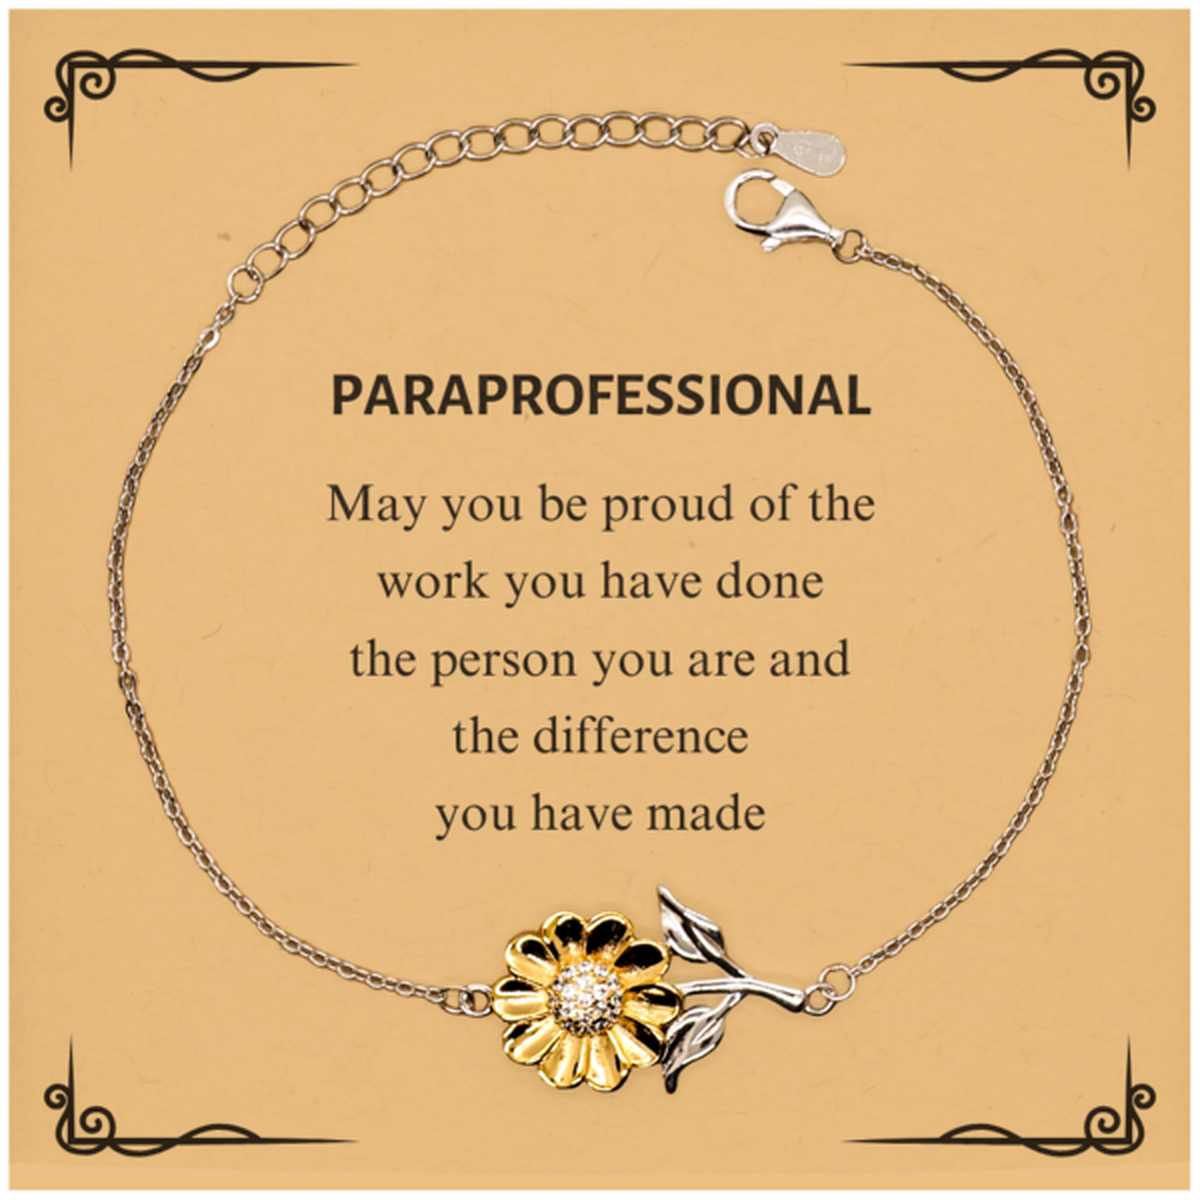 Paraprofessional May you be proud of the work you have done, Retirement Paraprofessional Sunflower Bracelet for Colleague Appreciation Gifts Amazing for Paraprofessional